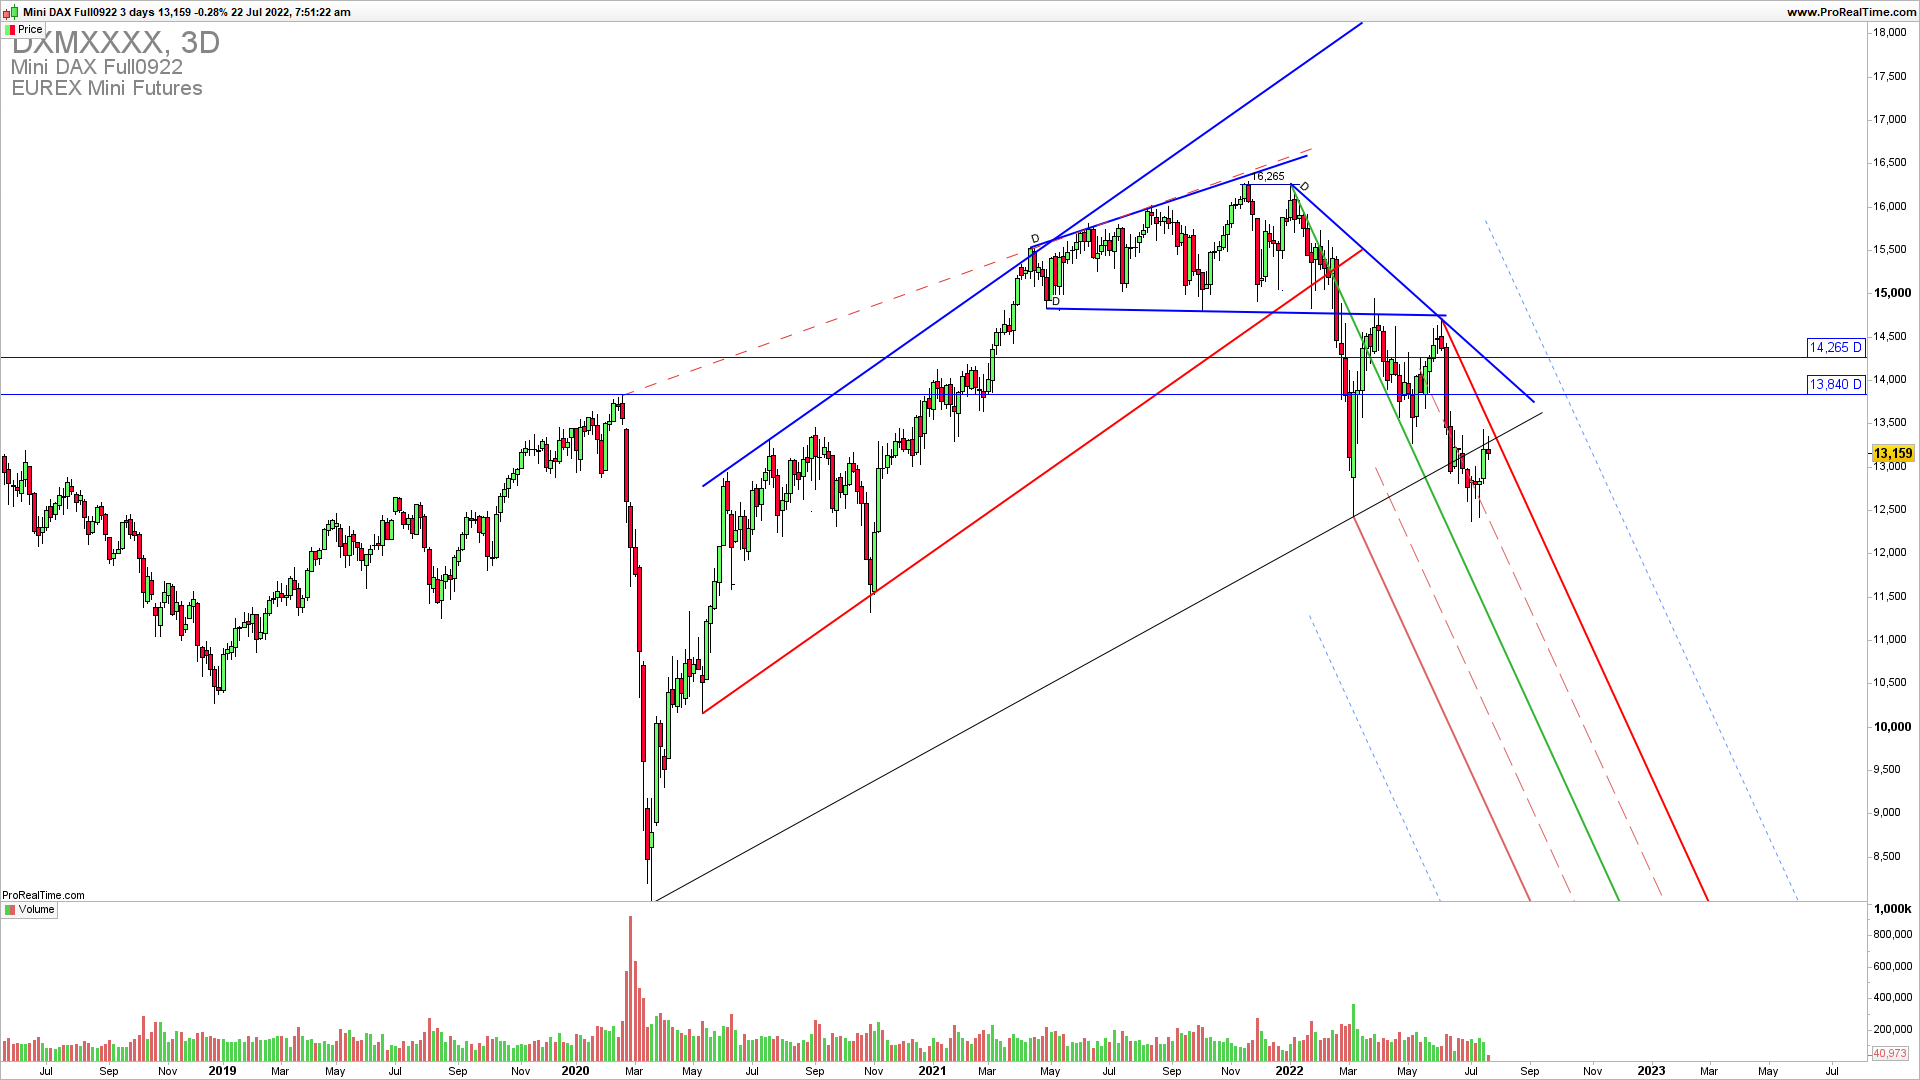 DAX downside continuation